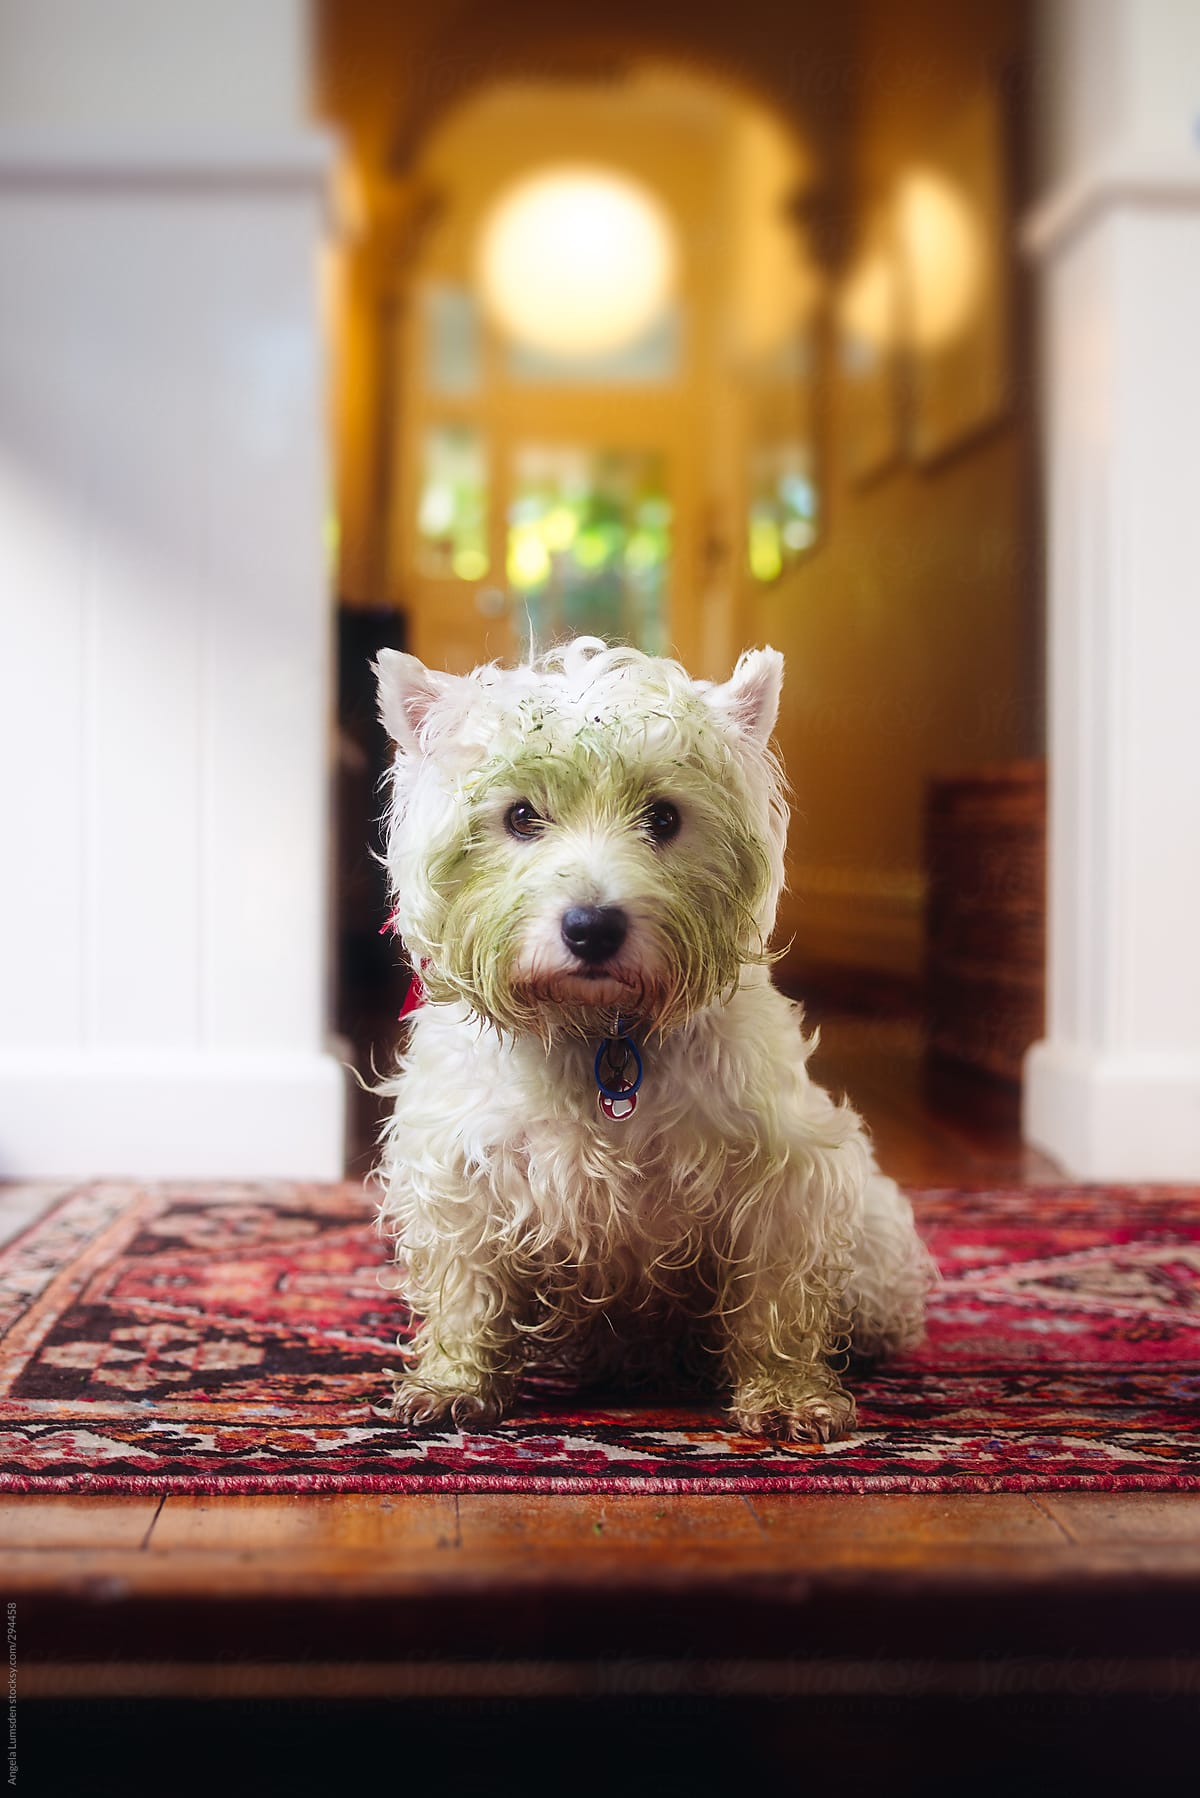 White dog with a green grass-stained face